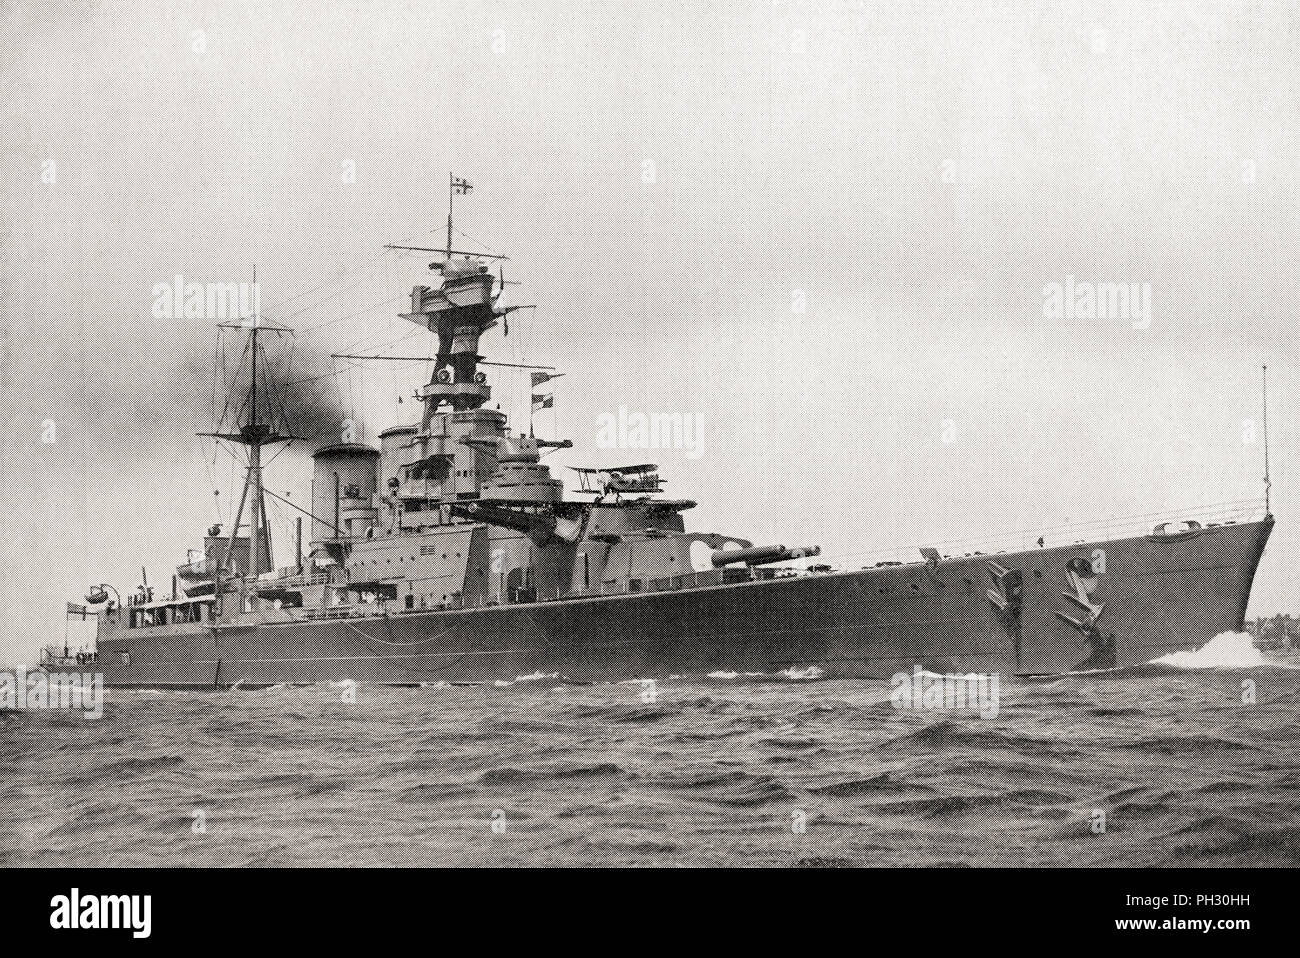 HMS Hood, the largest and last battle cruiser of the British Royal Navy, seen here carrying an airplane on the forward turret.  From The Book of Ships, published c.1920. Stock Photo